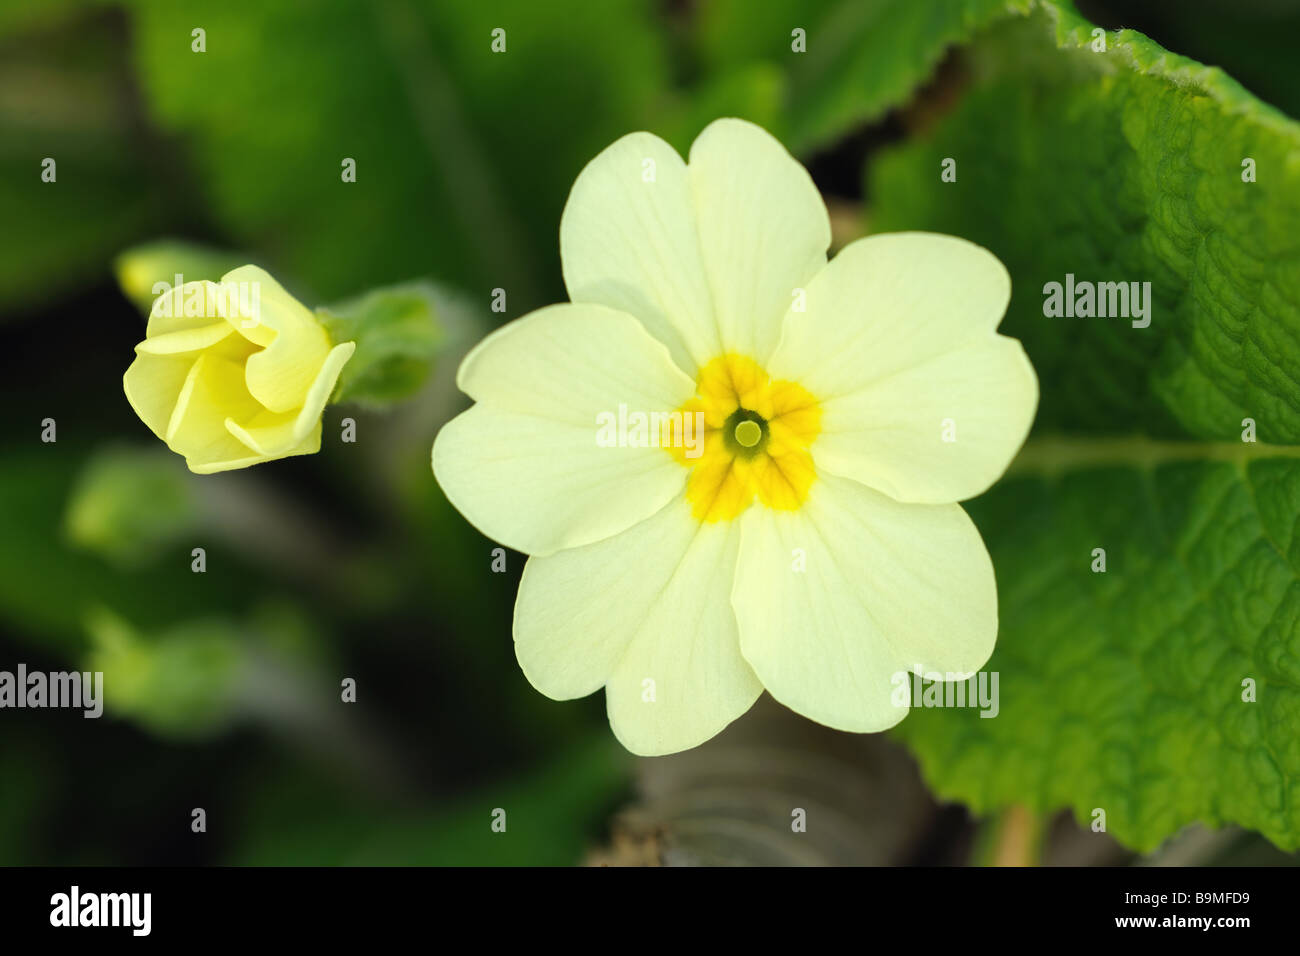 Pin eyed pale yellow primrose primula vulgaris is one of the first flowers to blossom in spring Stock Photo